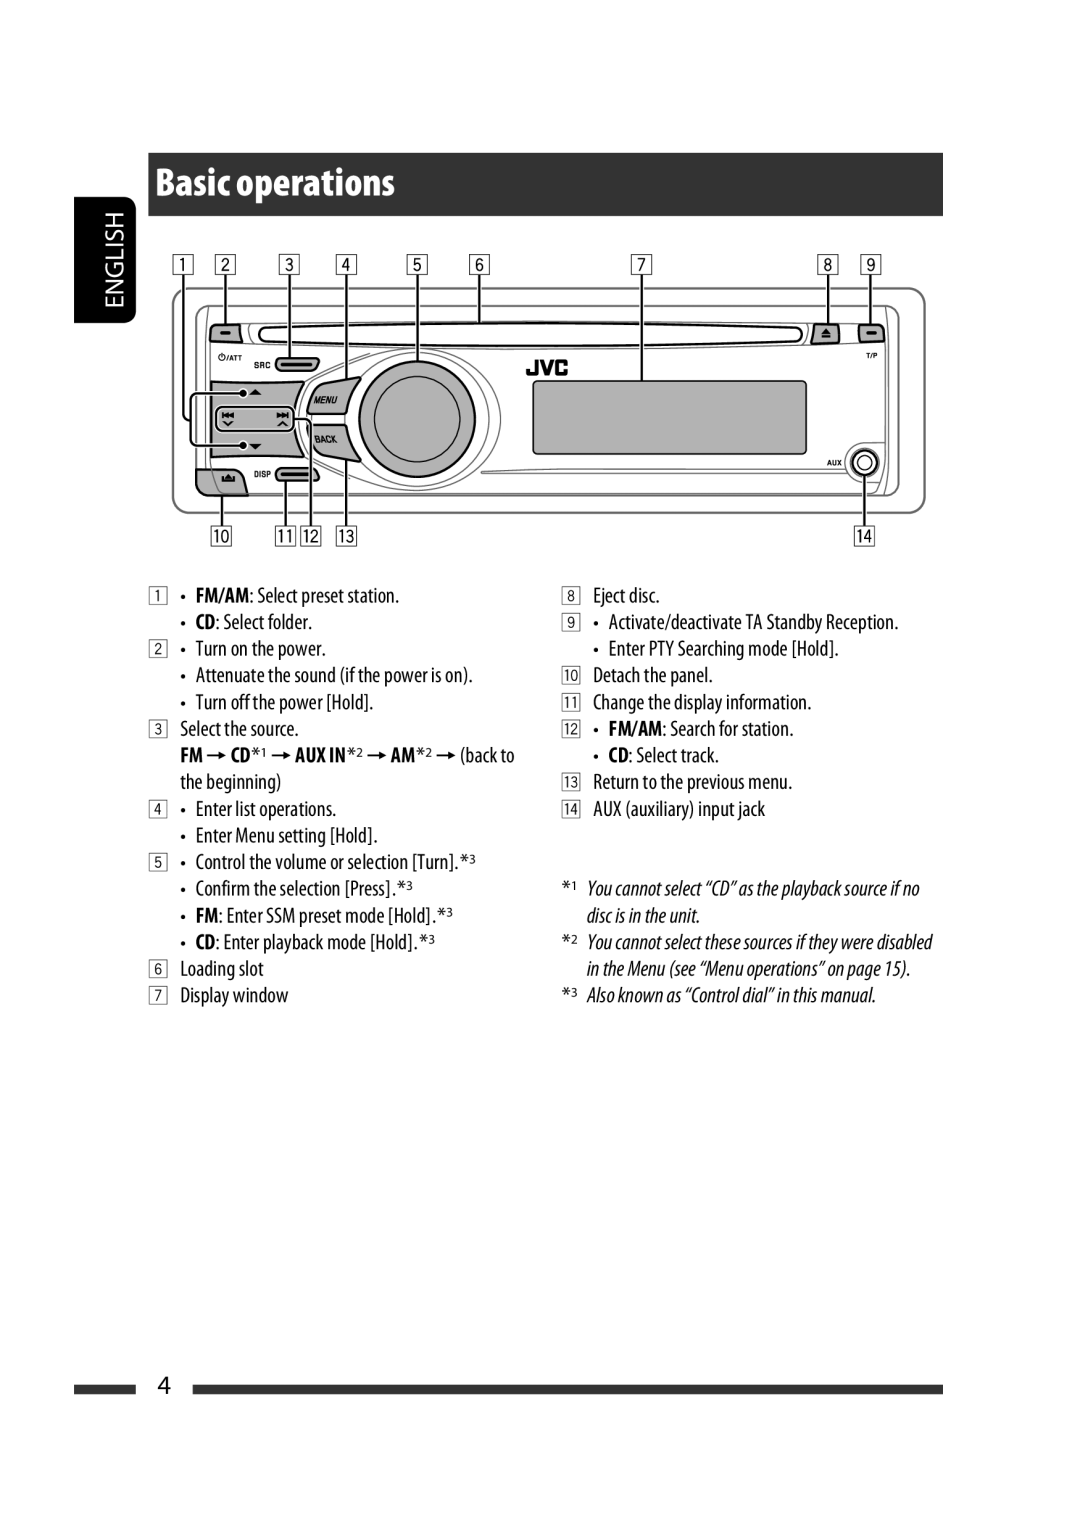 JVC KD-R302, KD-R303, KD-R301 manual Basic operations, English, disc is in the unit 